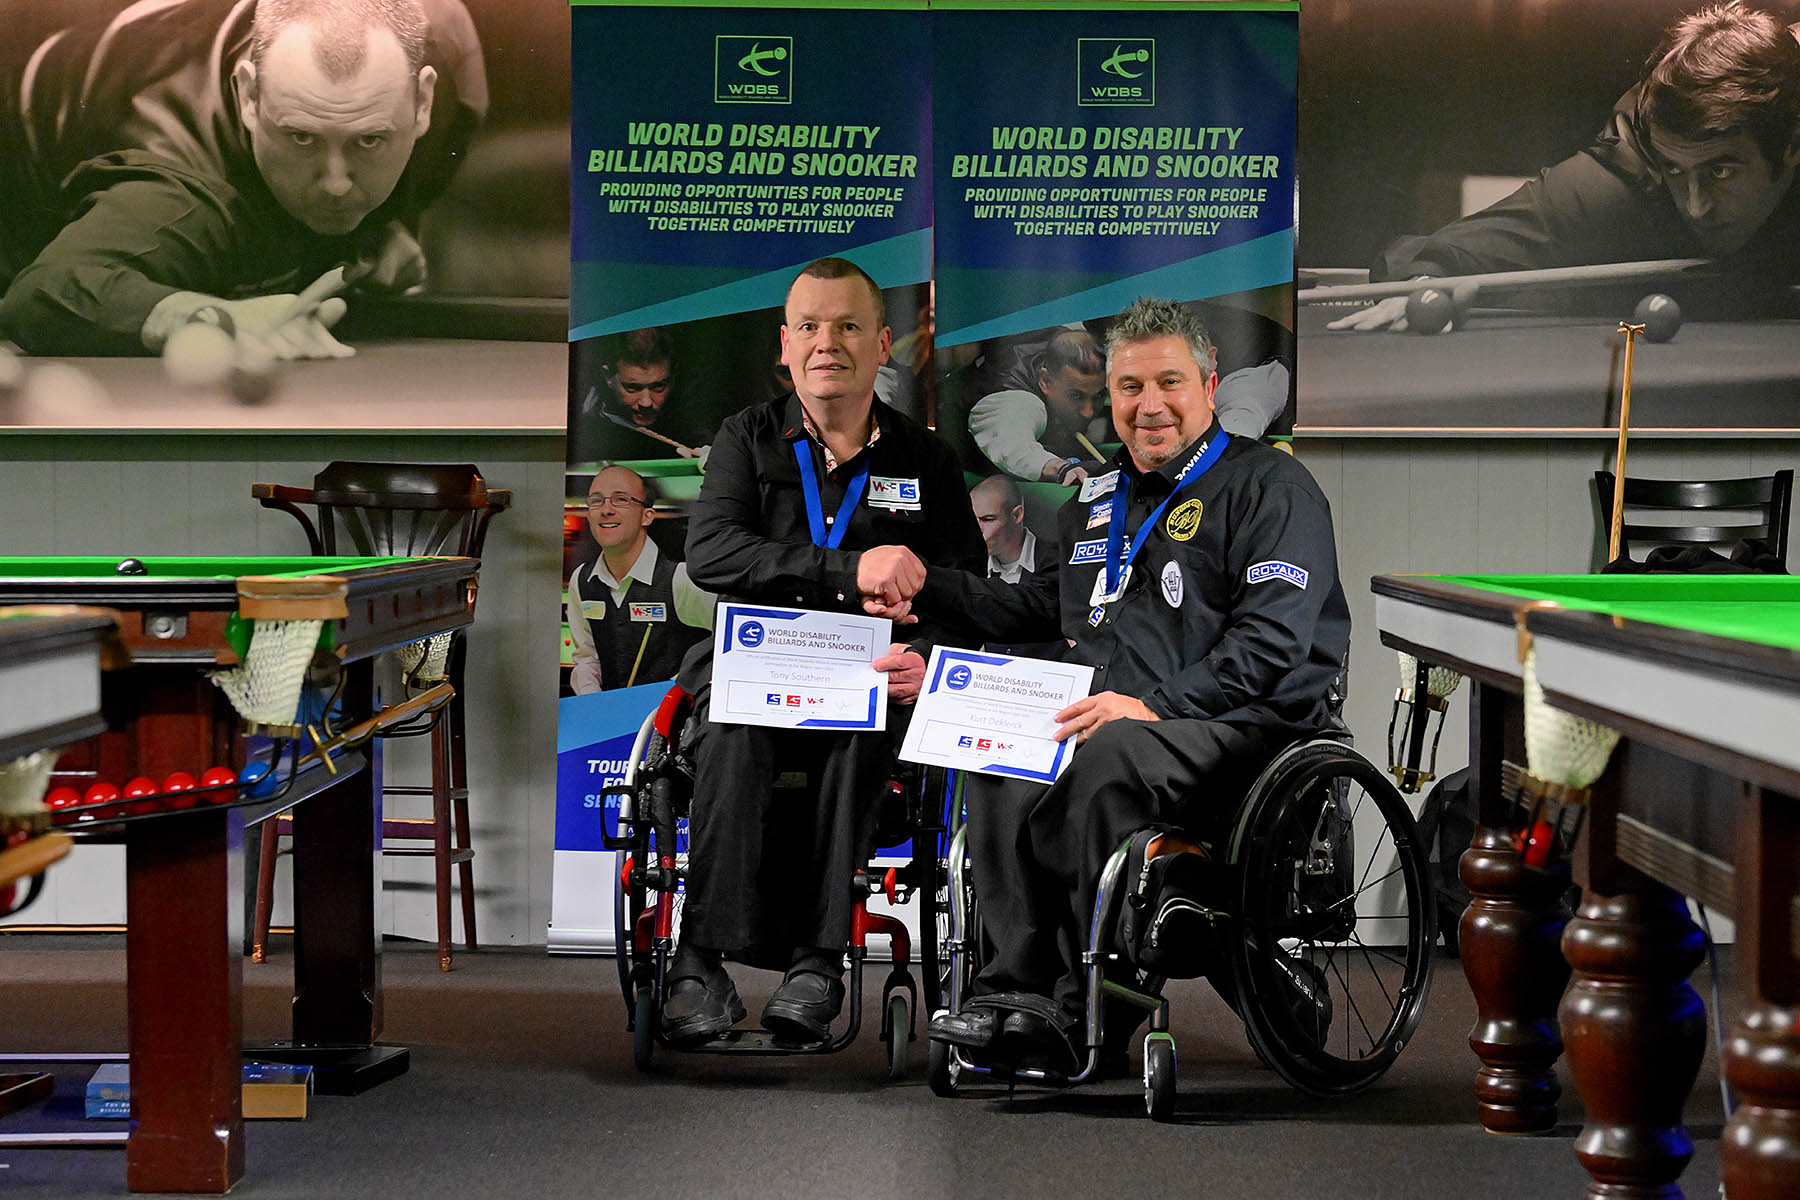 Two wheelchair users shaking hands with certificates